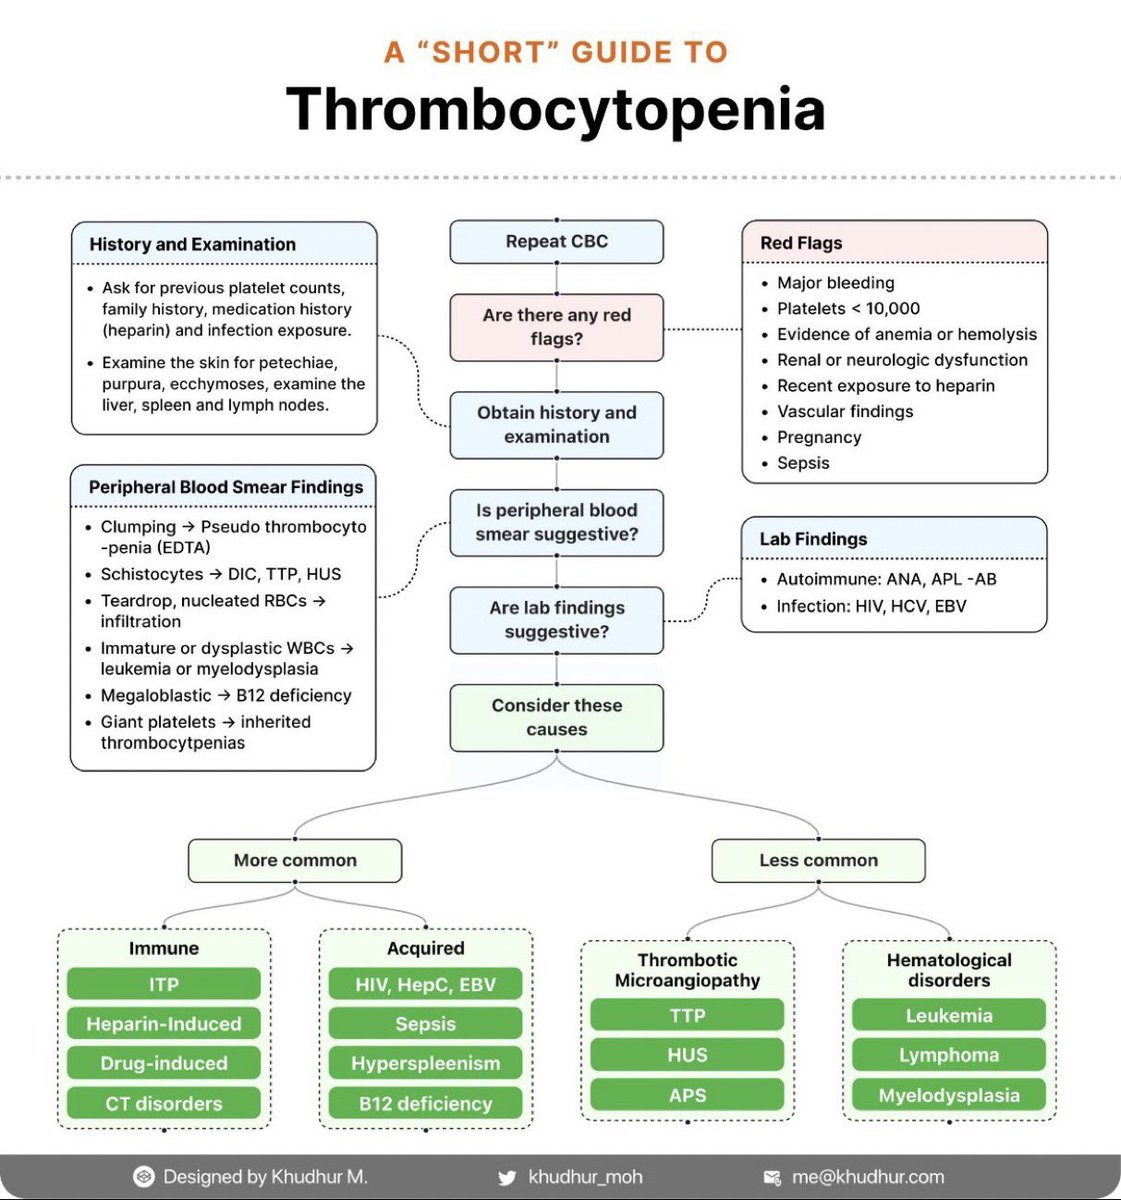 Approach to thrombocytopenia 

#FOAMed #FOAMcc #MedEd #medicaleducation #MedicalStudents #medicalpractice #emergency #medicine #RESIDENT #livertwitter #TwitterRx #MedTwitter